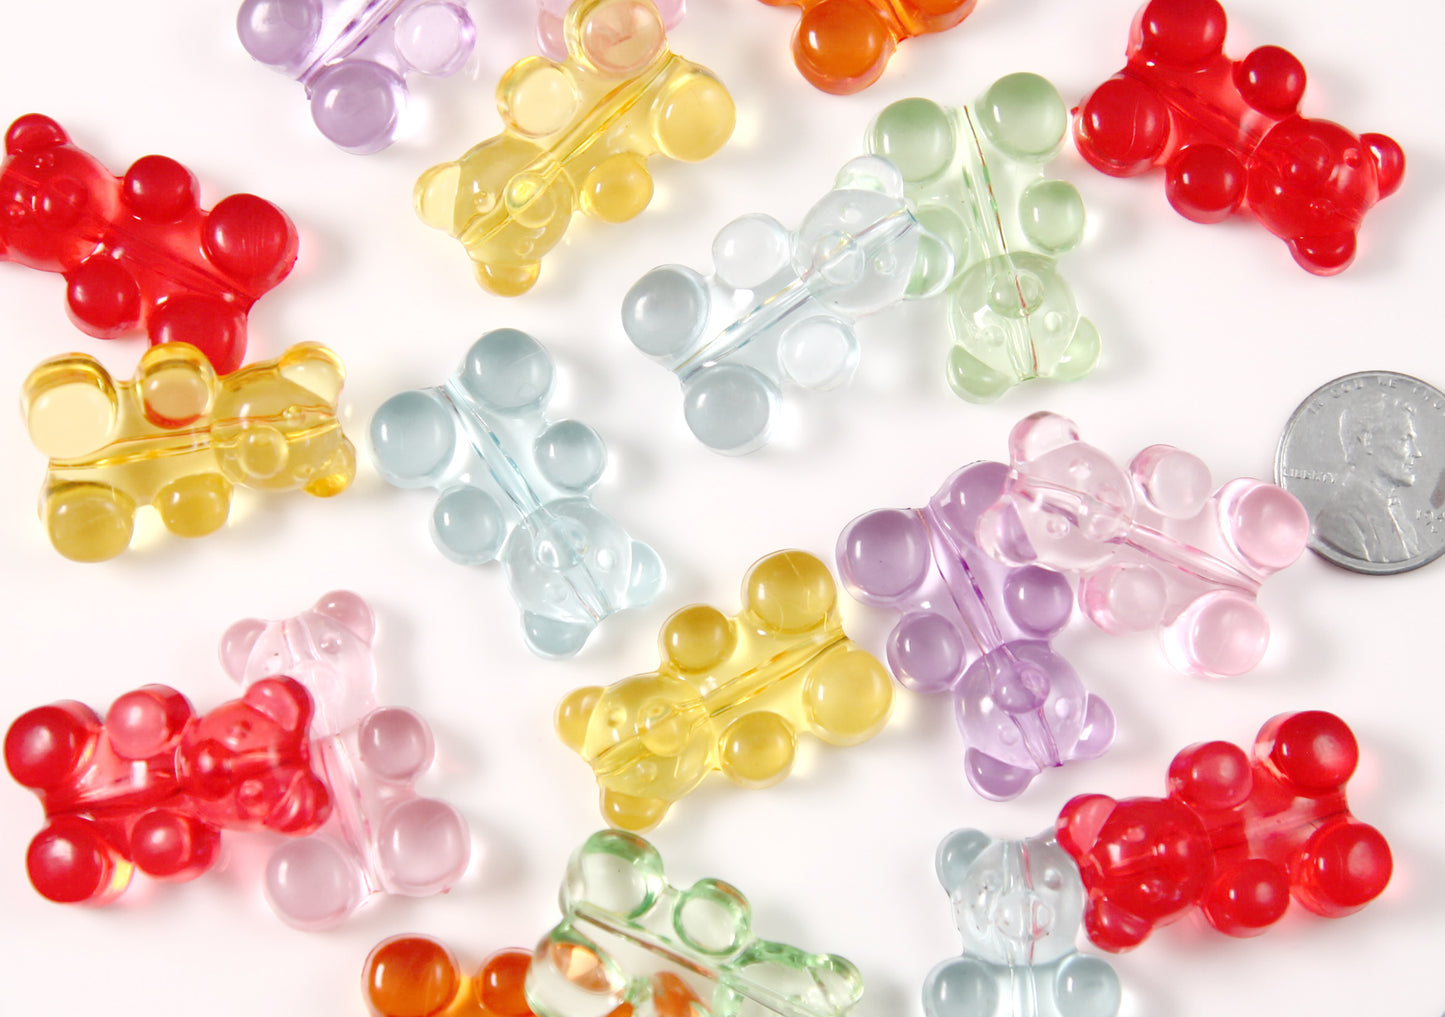 Big Gummy Bear Beads - 30mm Fake Gummy Bears with Hole for Stringing - Fake Candy Resin Beads - 21 pc set